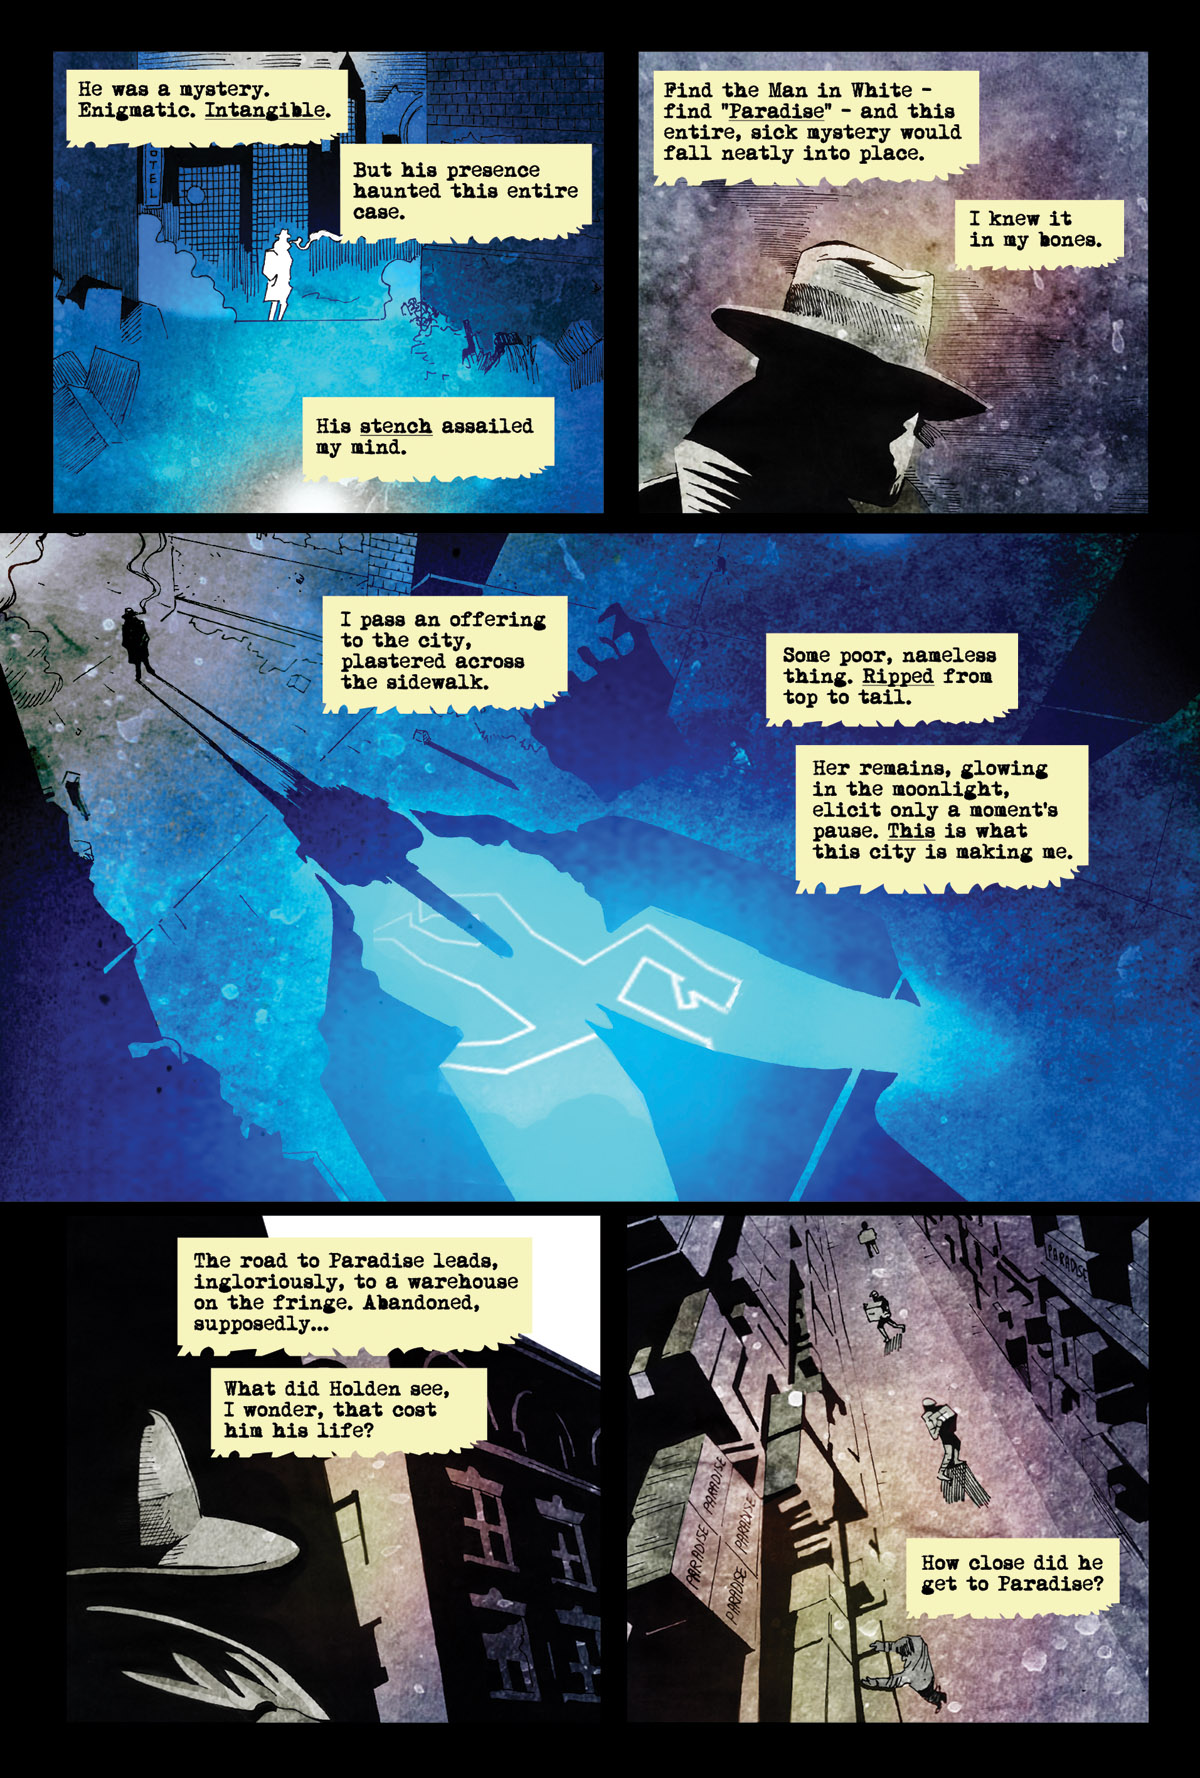 Afterlife Inc. | Silver Screen | Page 3